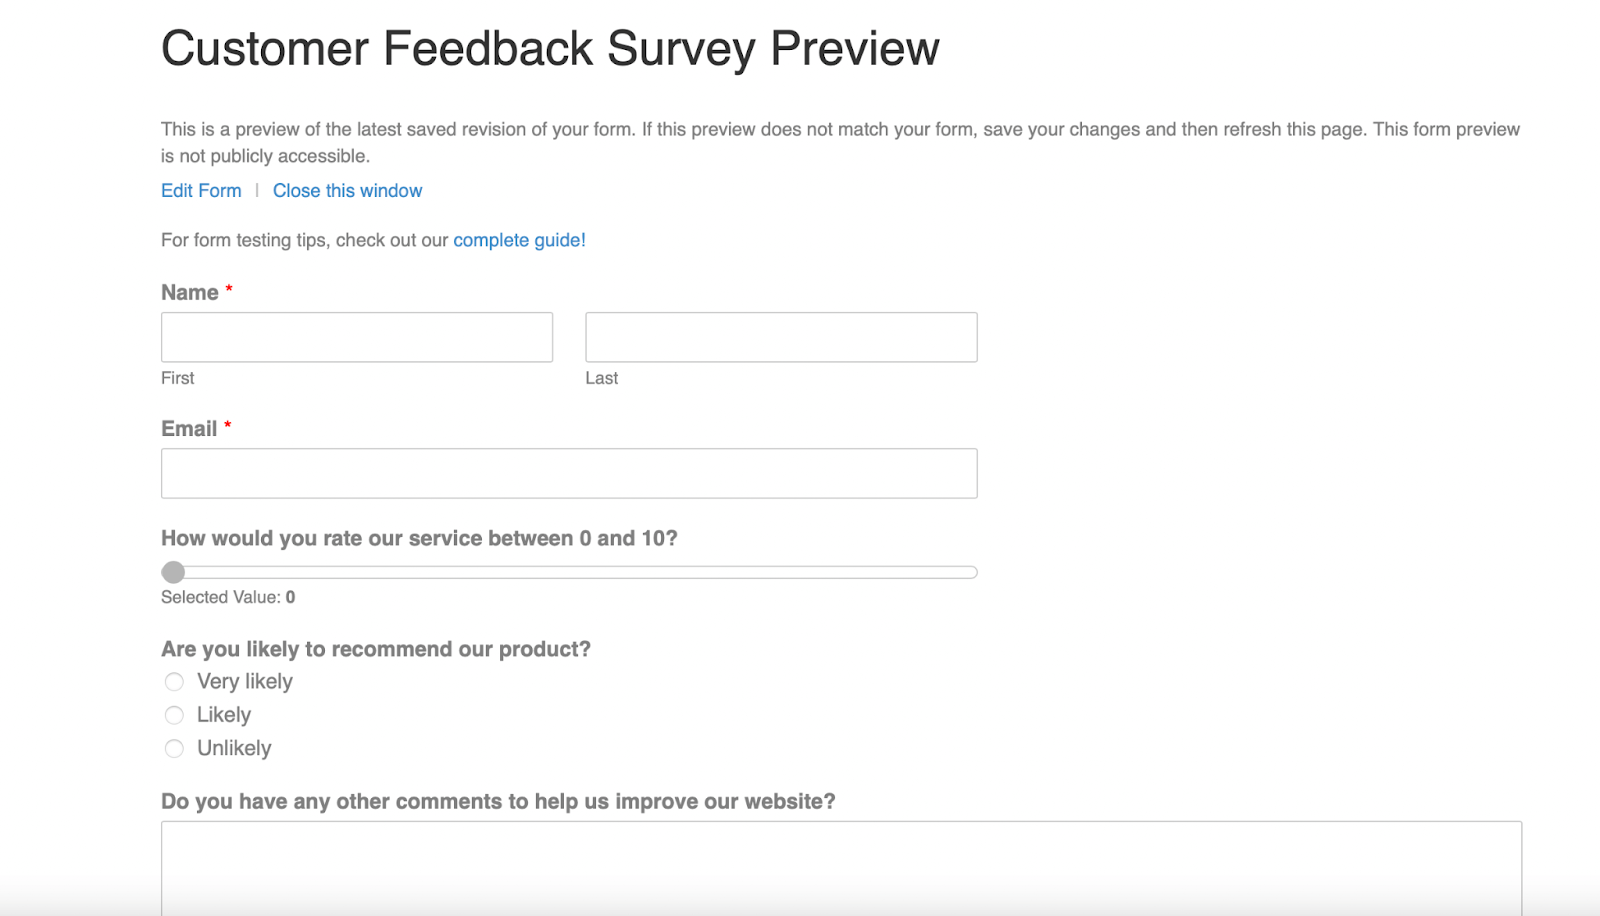 Preview your survey before hitting Publish!